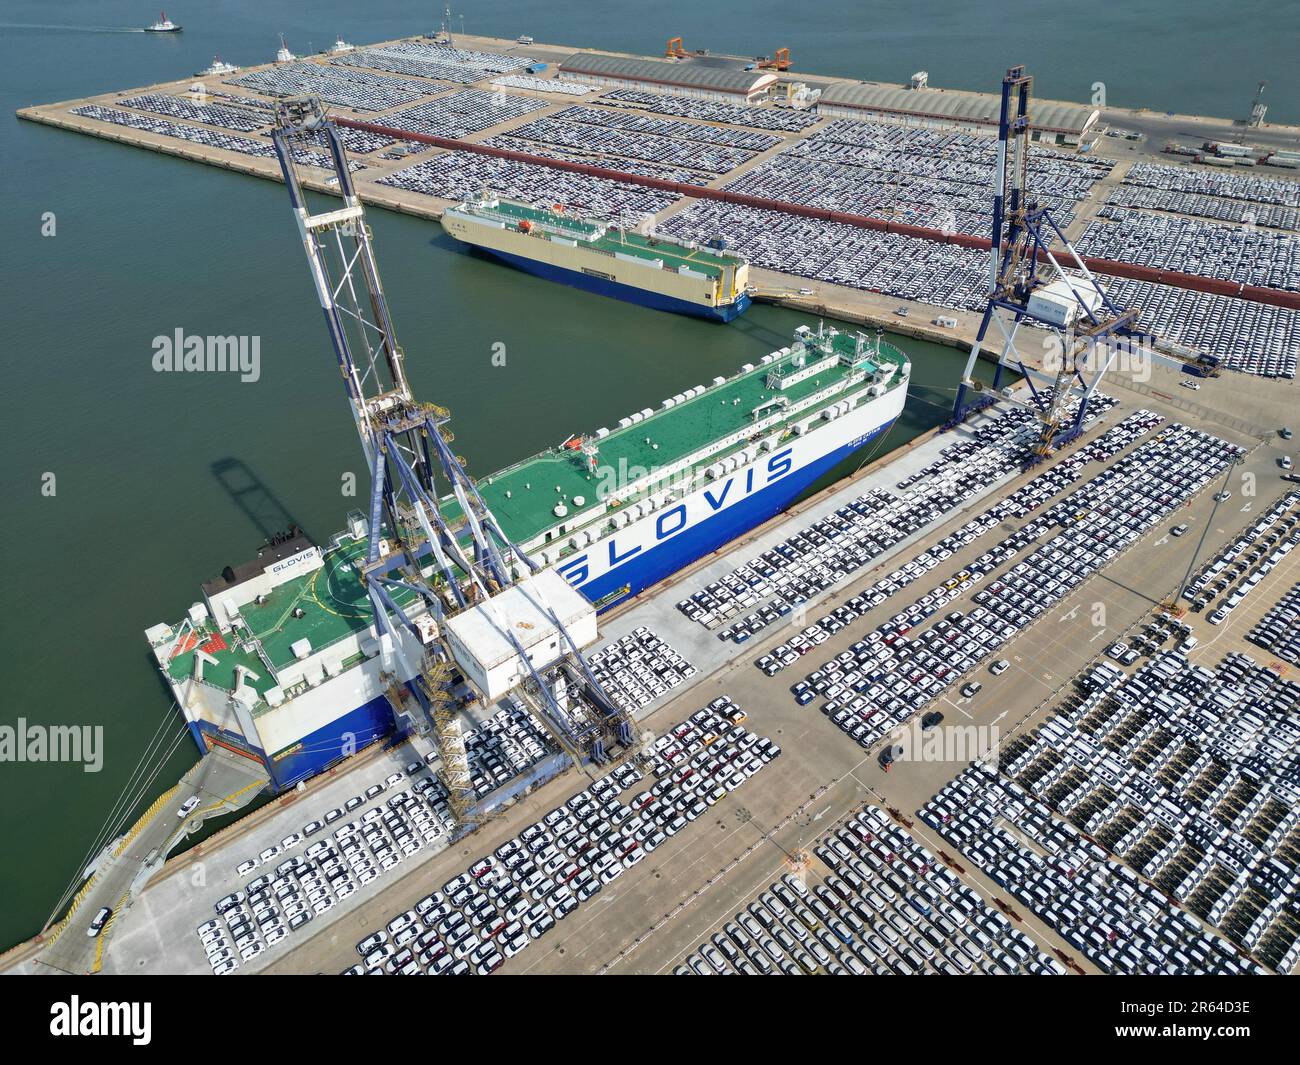 A large number of export vehicles are assembled at the port of Yantai to be shipped by ro-ro vehicles in Yantai, Shandong province, China, June 5, 202 Stock Photo